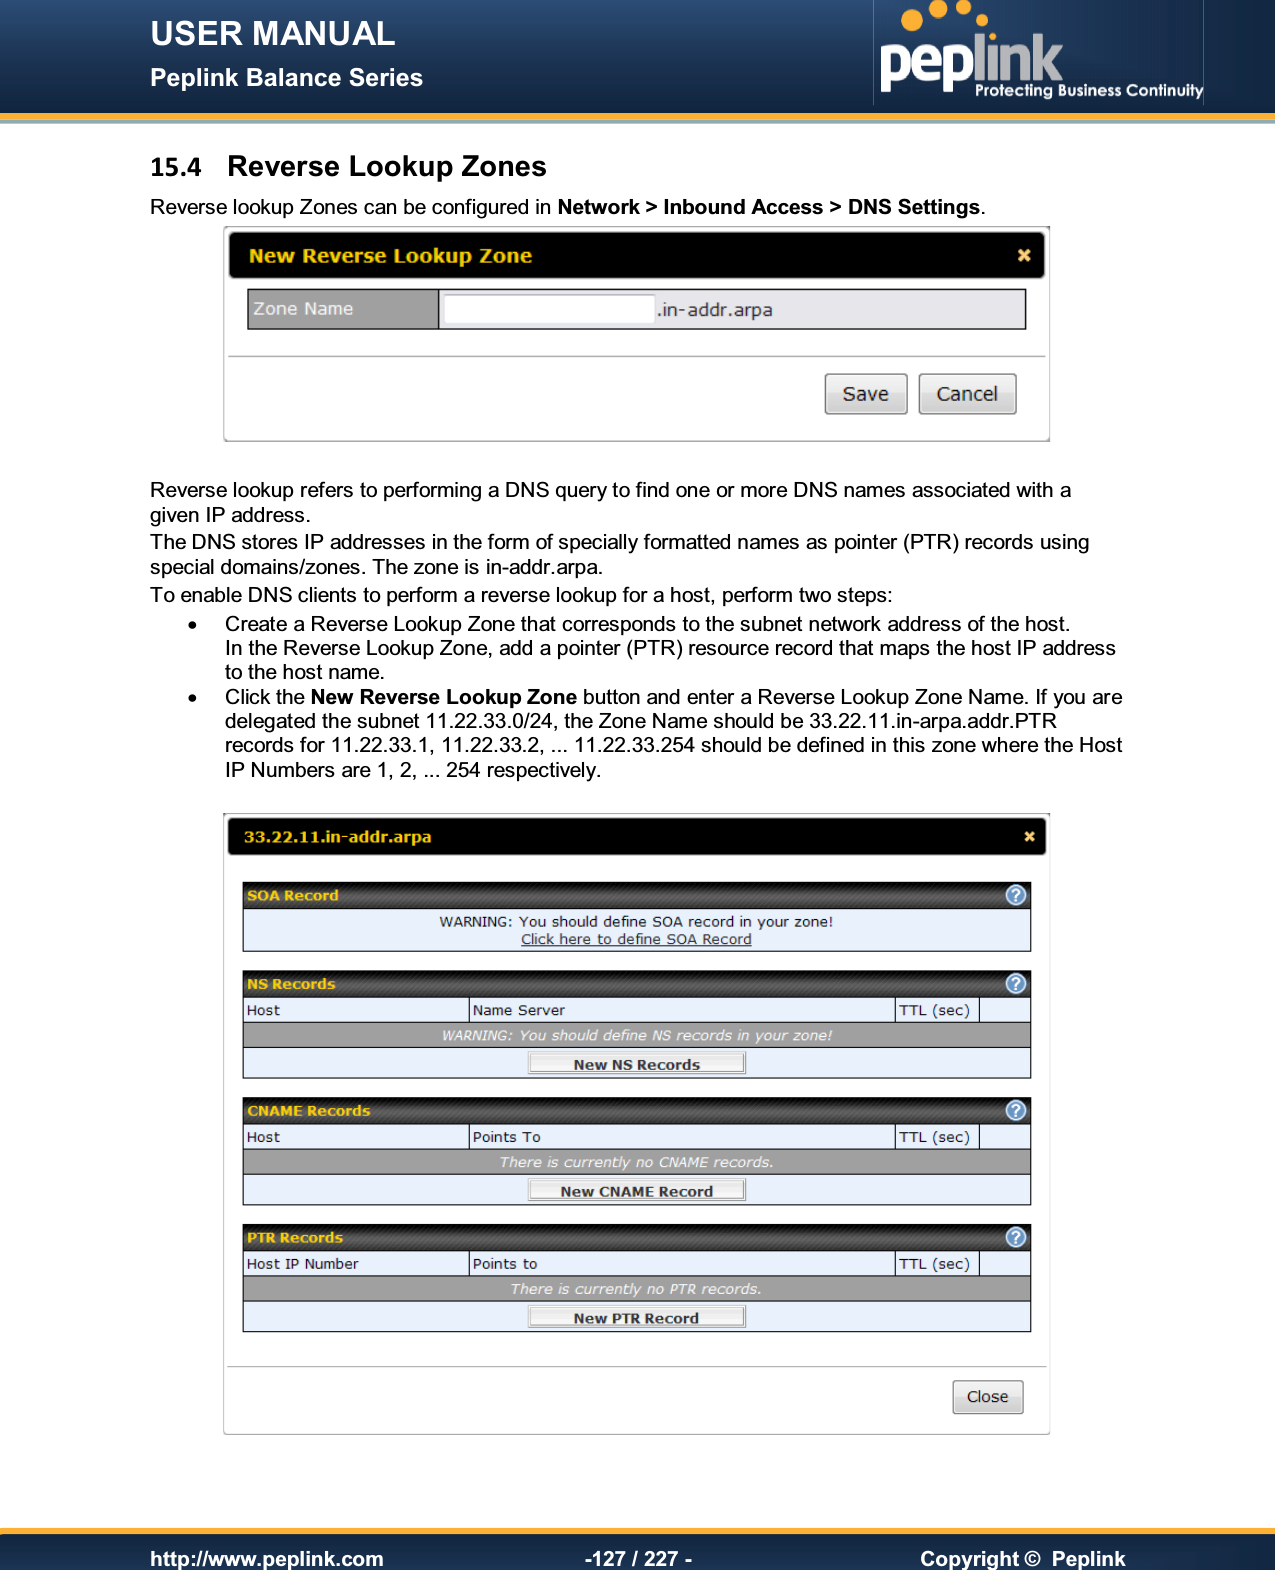 USER MANUAL Peplink Balance Series   http://www.peplink.com -127 / 227 -  Copyright ©  Peplink 15.4  Reverse Lookup Zones Reverse lookup Zones can be configured in Network &gt; Inbound Access &gt; DNS Settings.   Reverse lookup refers to performing a DNS query to find one or more DNS names associated with a given IP address. The DNS stores IP addresses in the form of specially formatted names as pointer (PTR) records using special domains/zones. The zone is in-addr.arpa. To enable DNS clients to perform a reverse lookup for a host, perform two steps: ·  Create a Reverse Lookup Zone that corresponds to the subnet network address of the host.  In the Reverse Lookup Zone, add a pointer (PTR) resource record that maps the host IP address to the host name. ·  Click the New Reverse Lookup Zone button and enter a Reverse Lookup Zone Name. If you are delegated the subnet 11.22.33.0/24, the Zone Name should be 33.22.11.in-arpa.addr.PTR records for 11.22.33.1, 11.22.33.2, ... 11.22.33.254 should be defined in this zone where the Host IP Numbers are 1, 2, ... 254 respectively.     